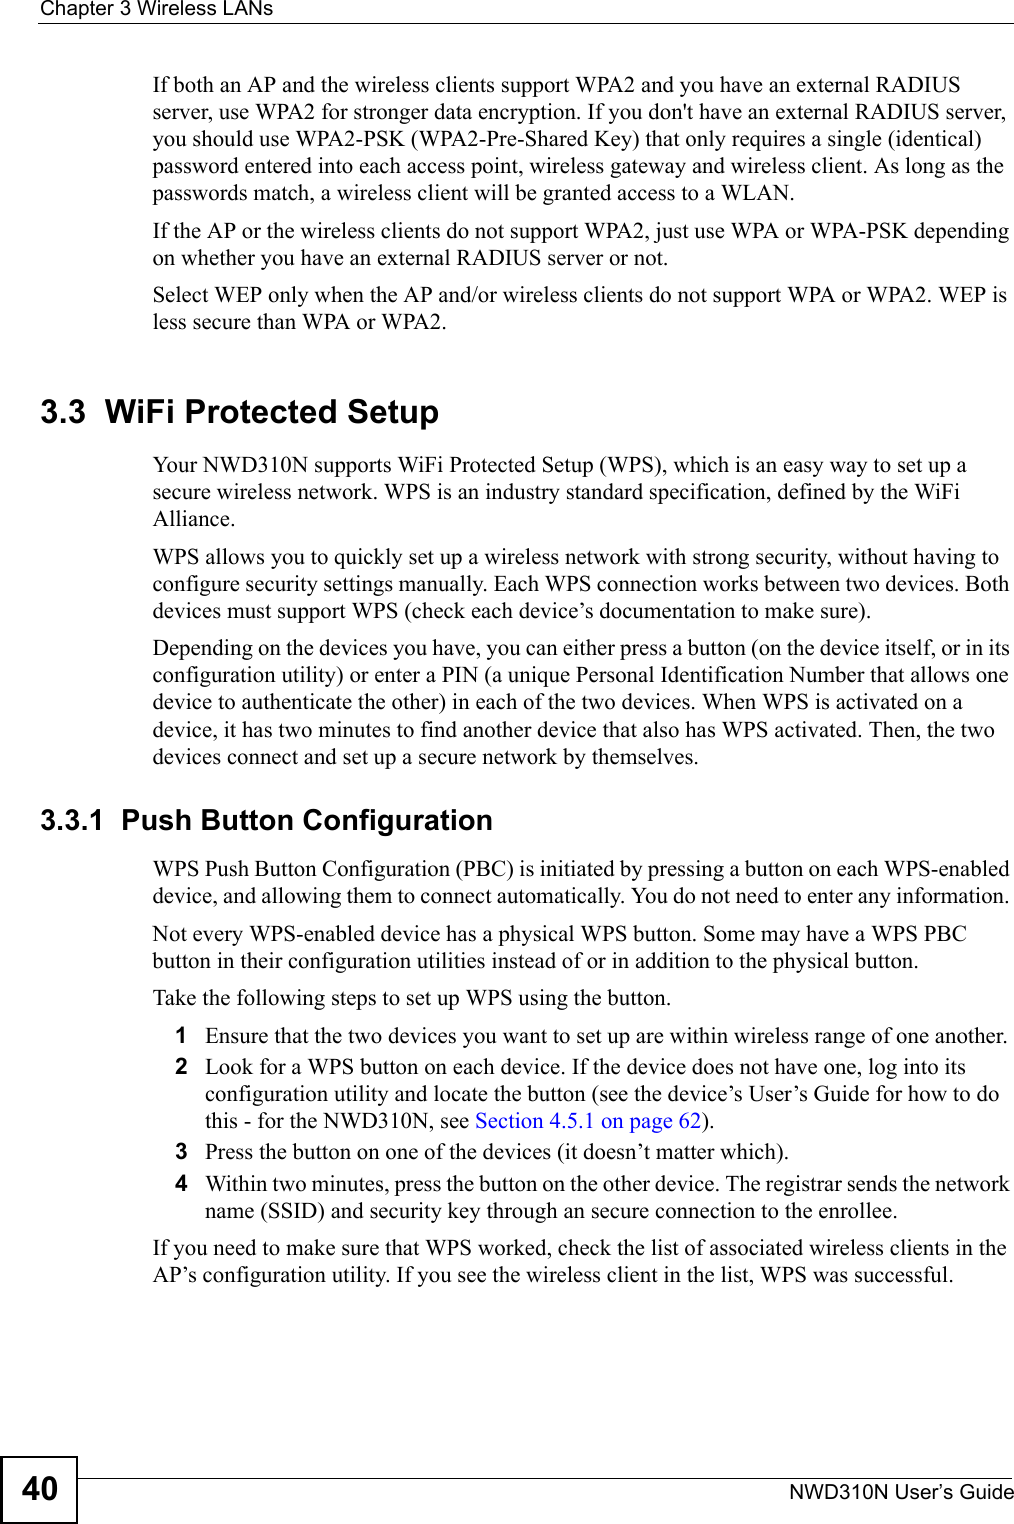 Chapter 3 Wireless LANsNWD310N User’s Guide40If both an AP and the wireless clients support WPA2 and you have an external RADIUS server, use WPA2 for stronger data encryption. If you don&apos;t have an external RADIUS server, you should use WPA2-PSK (WPA2-Pre-Shared Key) that only requires a single (identical) password entered into each access point, wireless gateway and wireless client. As long as the passwords match, a wireless client will be granted access to a WLAN. If the AP or the wireless clients do not support WPA2, just use WPA or WPA-PSK depending on whether you have an external RADIUS server or not.Select WEP only when the AP and/or wireless clients do not support WPA or WPA2. WEP is less secure than WPA or WPA2.3.3  WiFi Protected SetupYour NWD310N supports WiFi Protected Setup (WPS), which is an easy way to set up a secure wireless network. WPS is an industry standard specification, defined by the WiFi Alliance.WPS allows you to quickly set up a wireless network with strong security, without having to configure security settings manually. Each WPS connection works between two devices. Both devices must support WPS (check each device’s documentation to make sure). Depending on the devices you have, you can either press a button (on the device itself, or in its configuration utility) or enter a PIN (a unique Personal Identification Number that allows one device to authenticate the other) in each of the two devices. When WPS is activated on a device, it has two minutes to find another device that also has WPS activated. Then, the two devices connect and set up a secure network by themselves.3.3.1  Push Button ConfigurationWPS Push Button Configuration (PBC) is initiated by pressing a button on each WPS-enabled device, and allowing them to connect automatically. You do not need to enter any information. Not every WPS-enabled device has a physical WPS button. Some may have a WPS PBC button in their configuration utilities instead of or in addition to the physical button.Take the following steps to set up WPS using the button.1Ensure that the two devices you want to set up are within wireless range of one another. 2Look for a WPS button on each device. If the device does not have one, log into its configuration utility and locate the button (see the device’s User’s Guide for how to do this - for the NWD310N, see Section 4.5.1 on page 62).3Press the button on one of the devices (it doesn’t matter which).4Within two minutes, press the button on the other device. The registrar sends the network name (SSID) and security key through an secure connection to the enrollee.If you need to make sure that WPS worked, check the list of associated wireless clients in the AP’s configuration utility. If you see the wireless client in the list, WPS was successful.